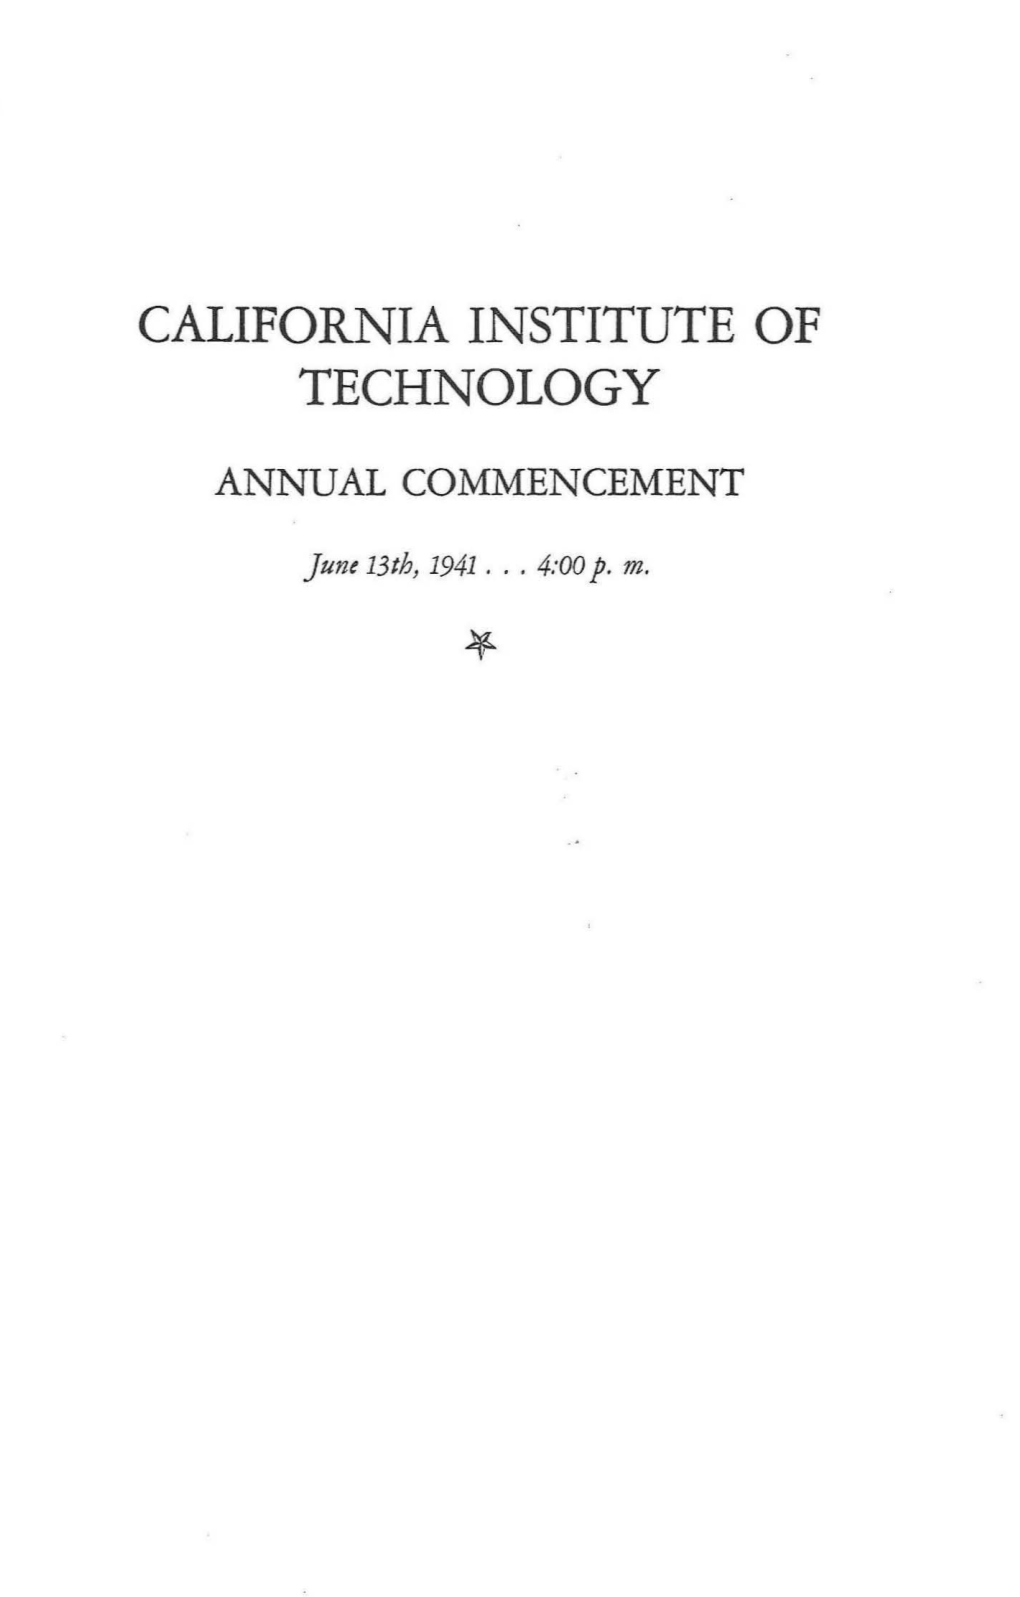 California Institute of Technology Annual Commencement